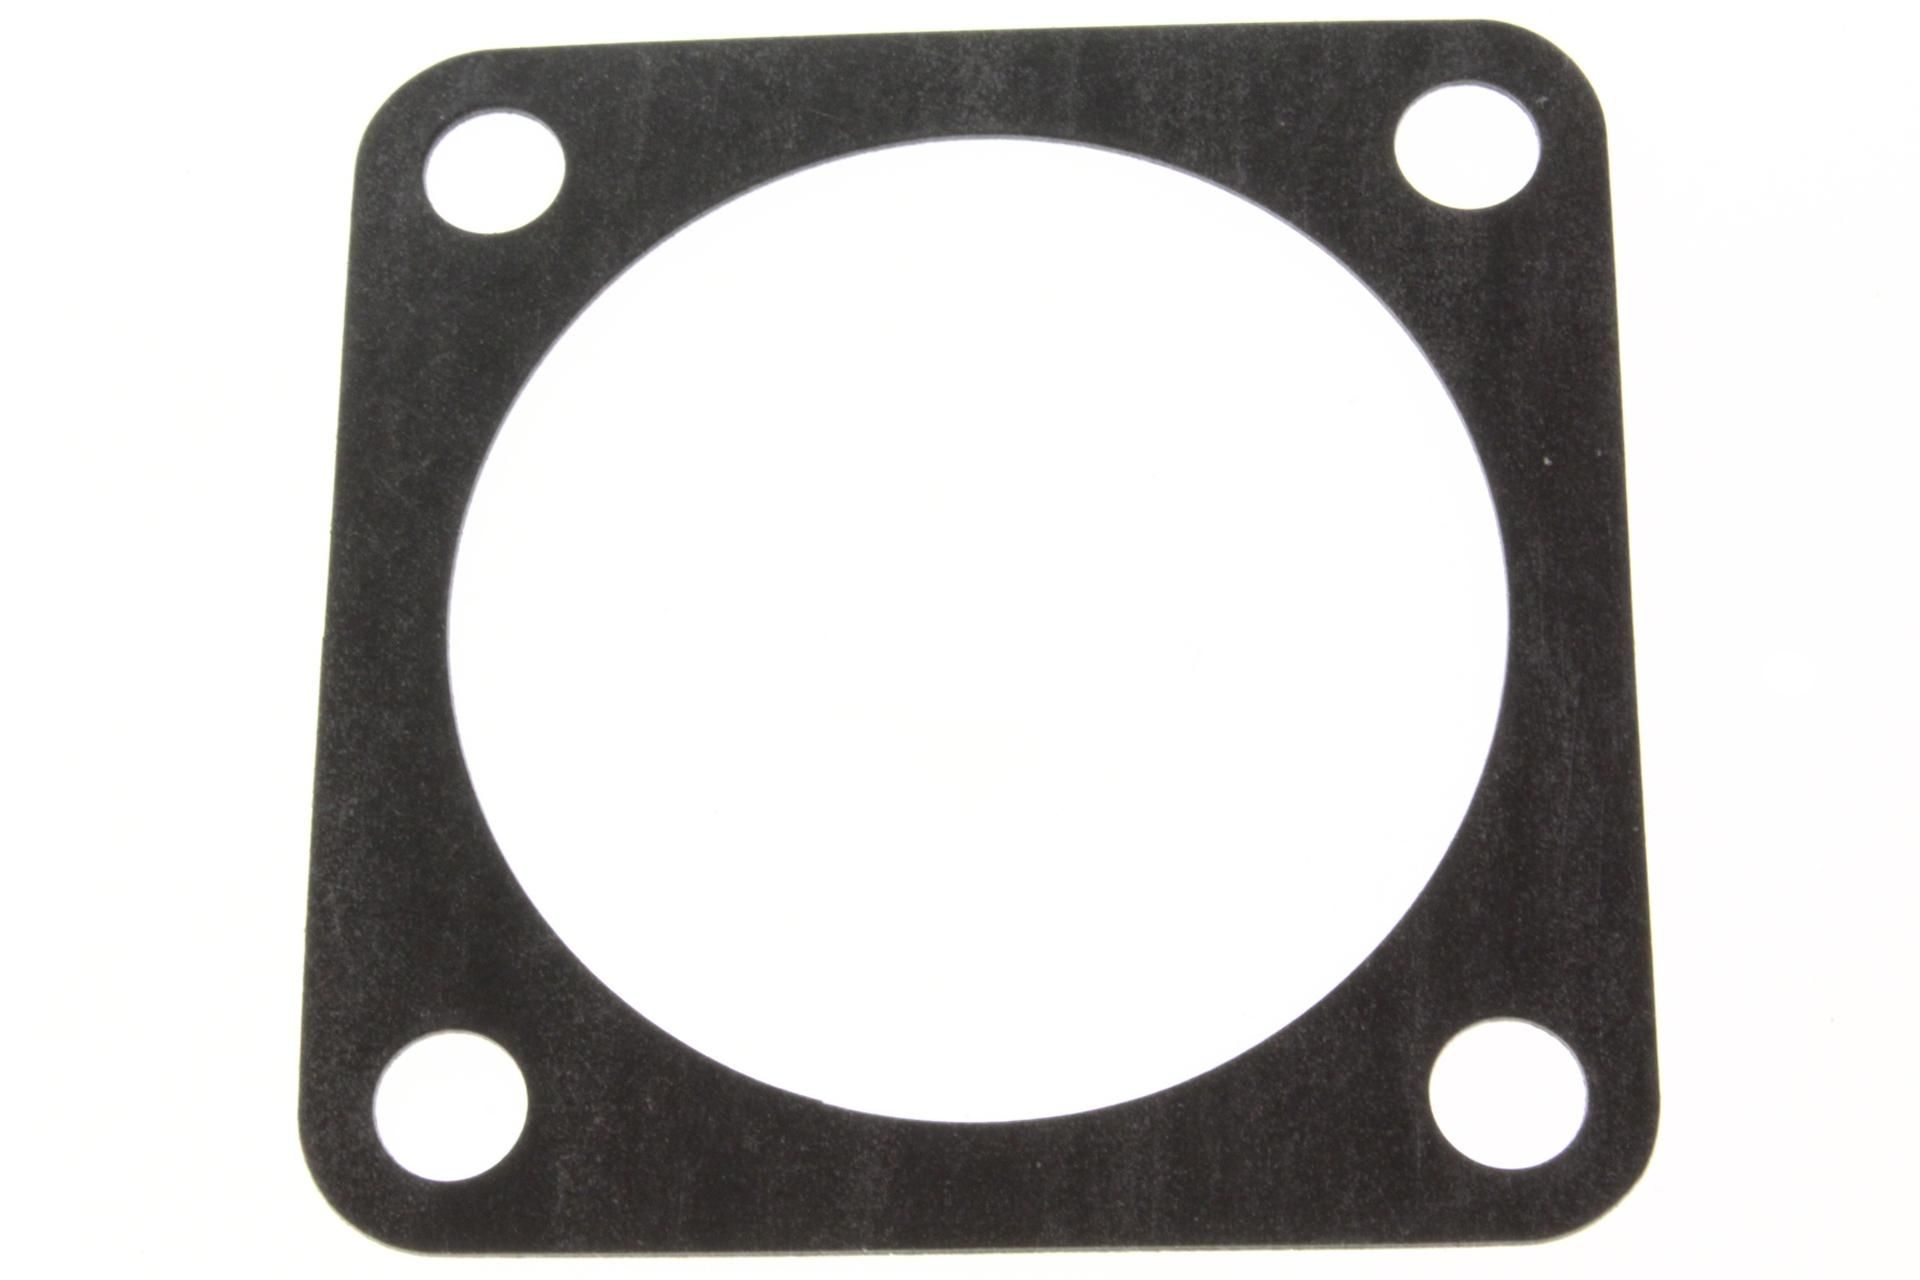 6M6-13674-A1-00 AIR COOL COVER GASKET